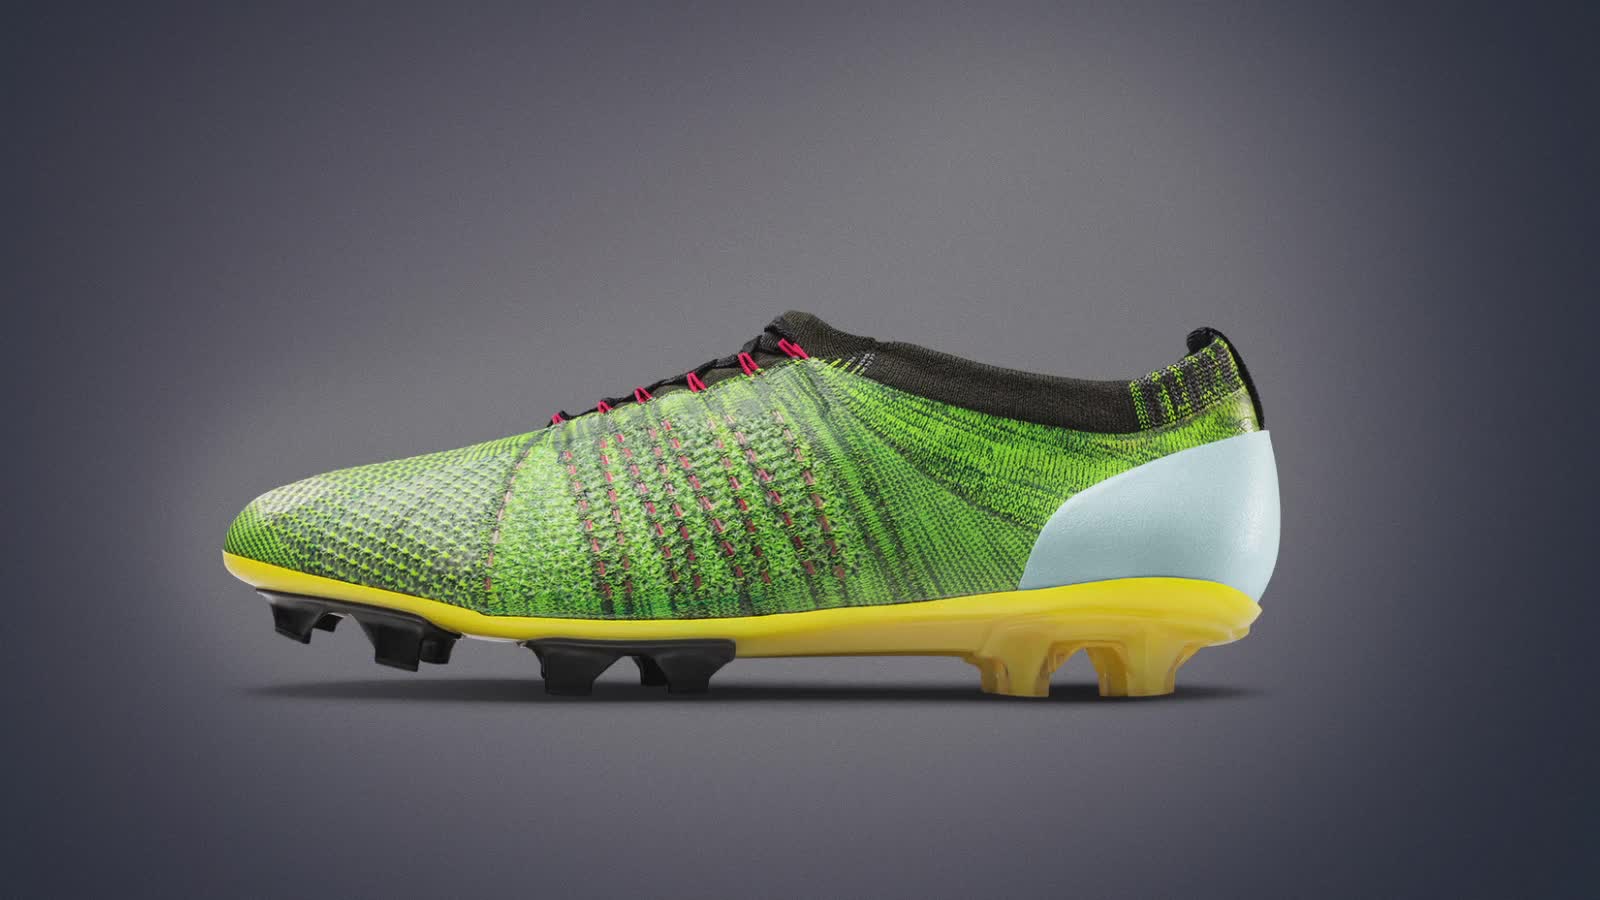 Nike Soccer Boots 2015 Wallpaper. Fashion Trends 2014